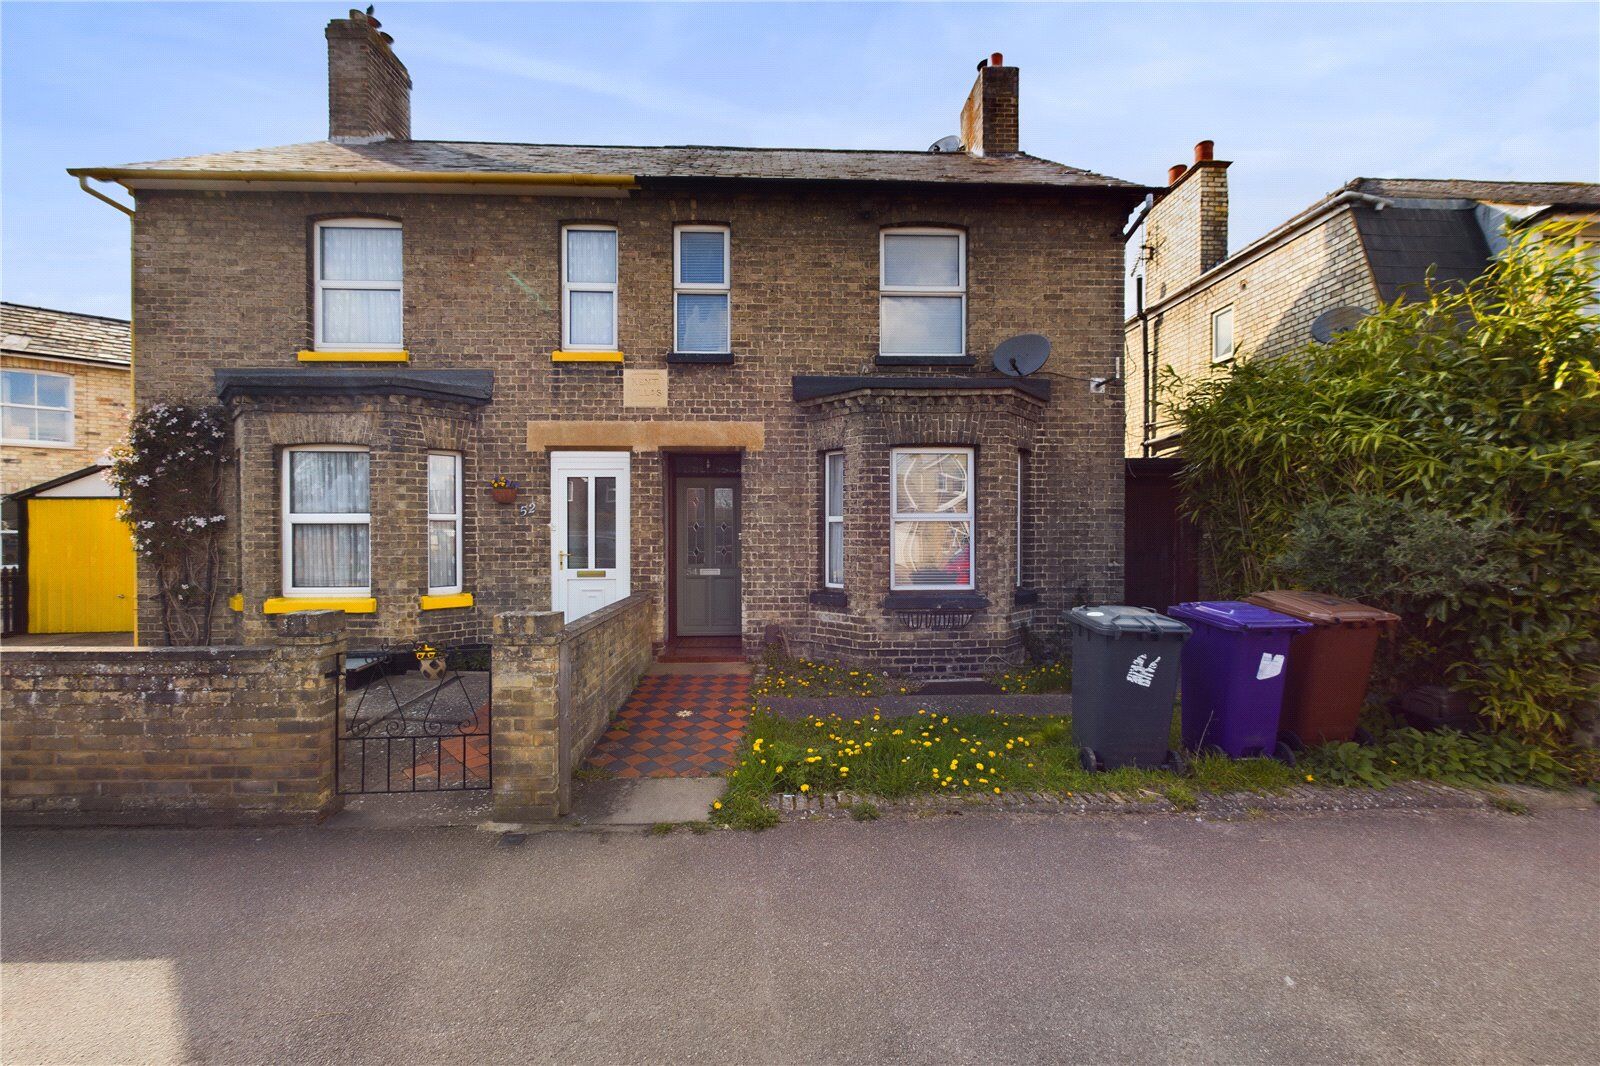 3 bedroom semi detached house to rent, Available from 25/05/2024 Melbourn Road, Royston, SG8, main image